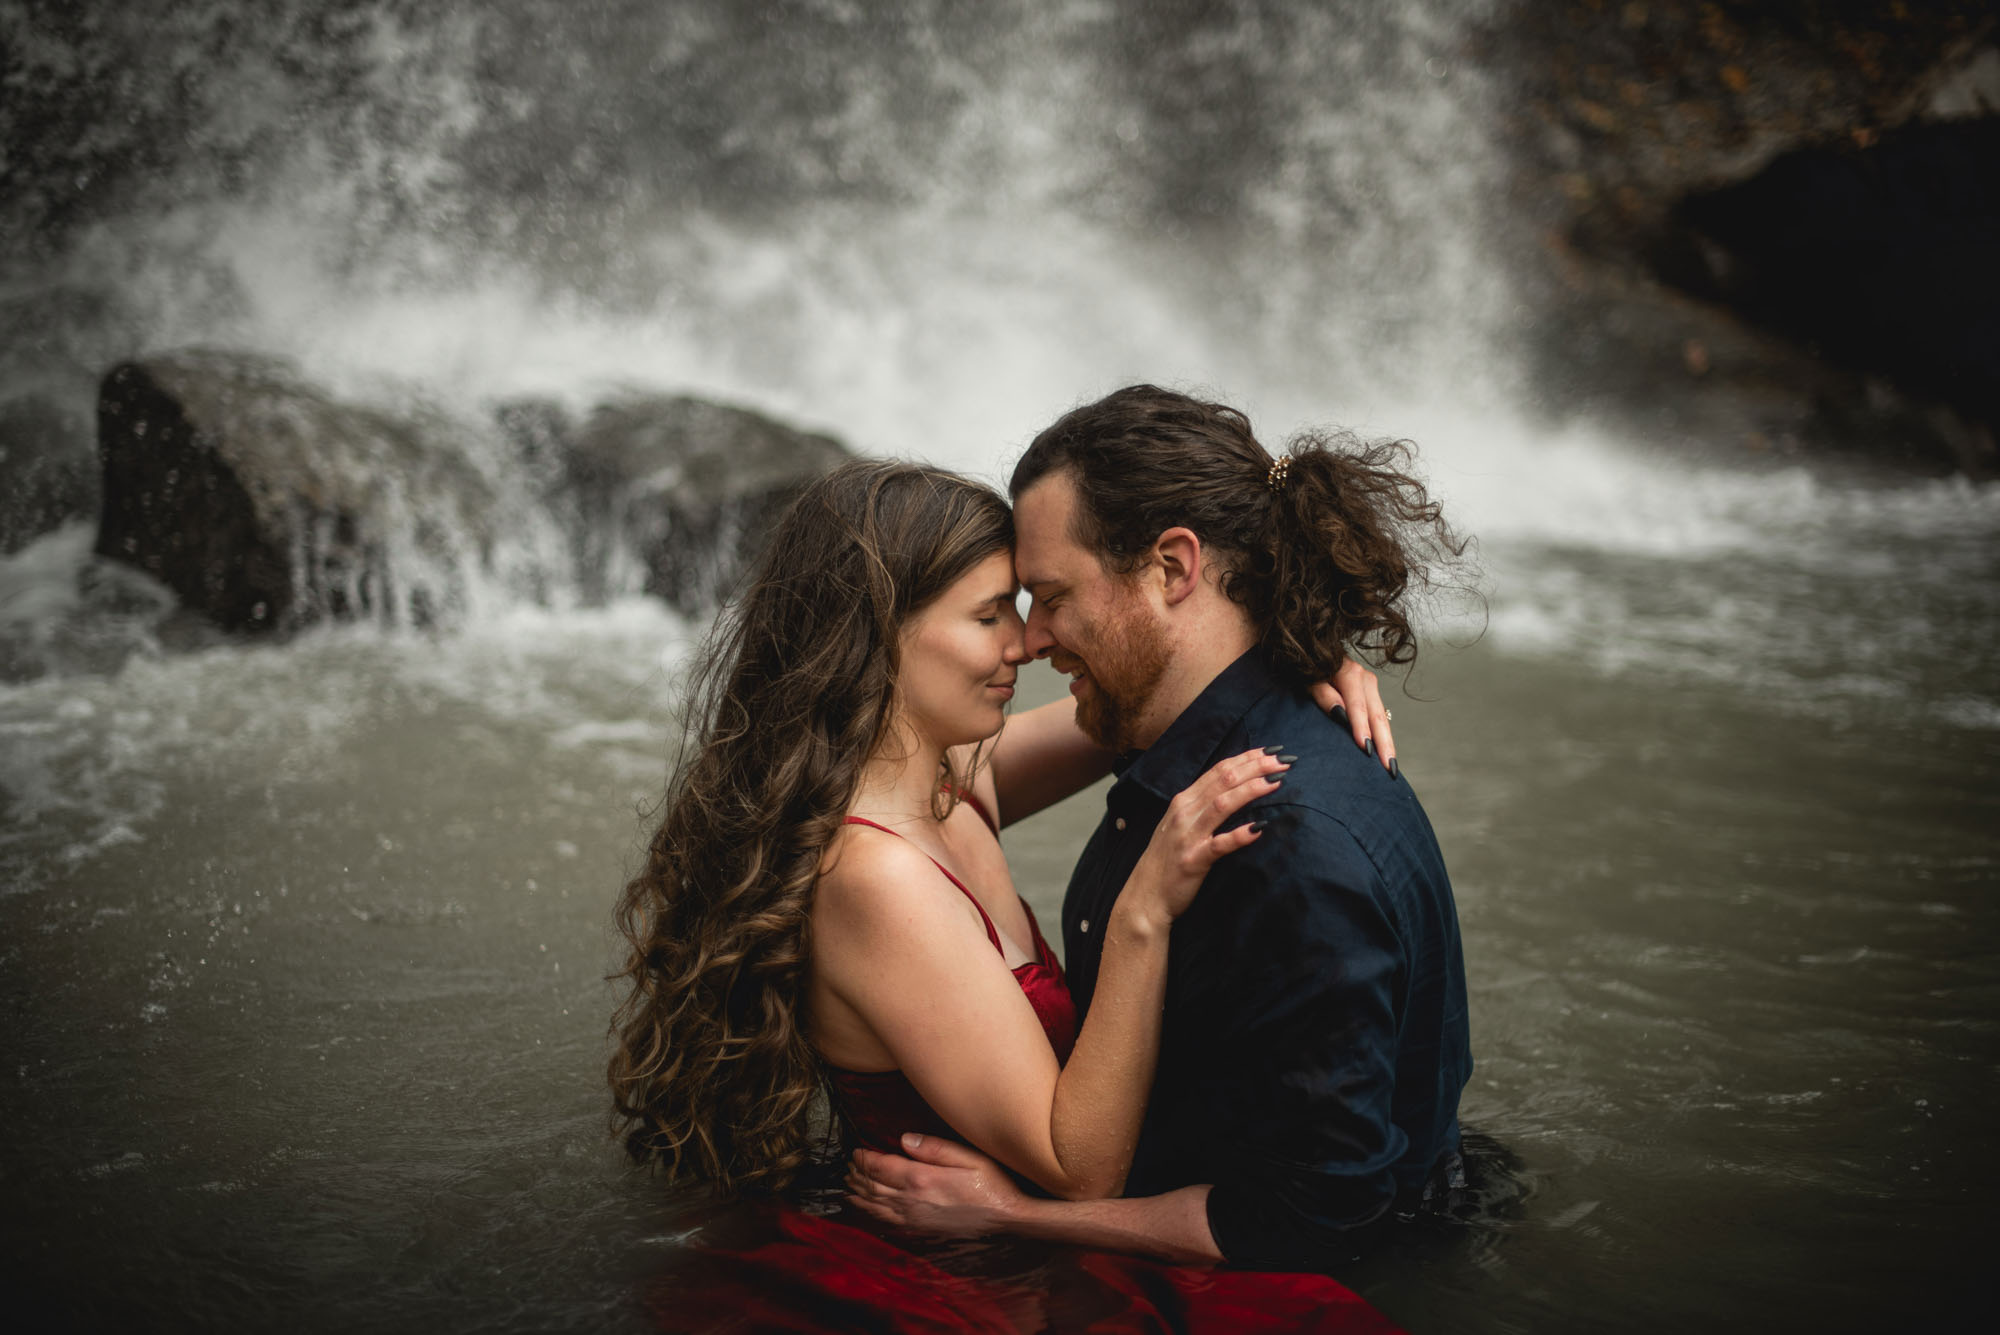 Waterfall Engagement Photography